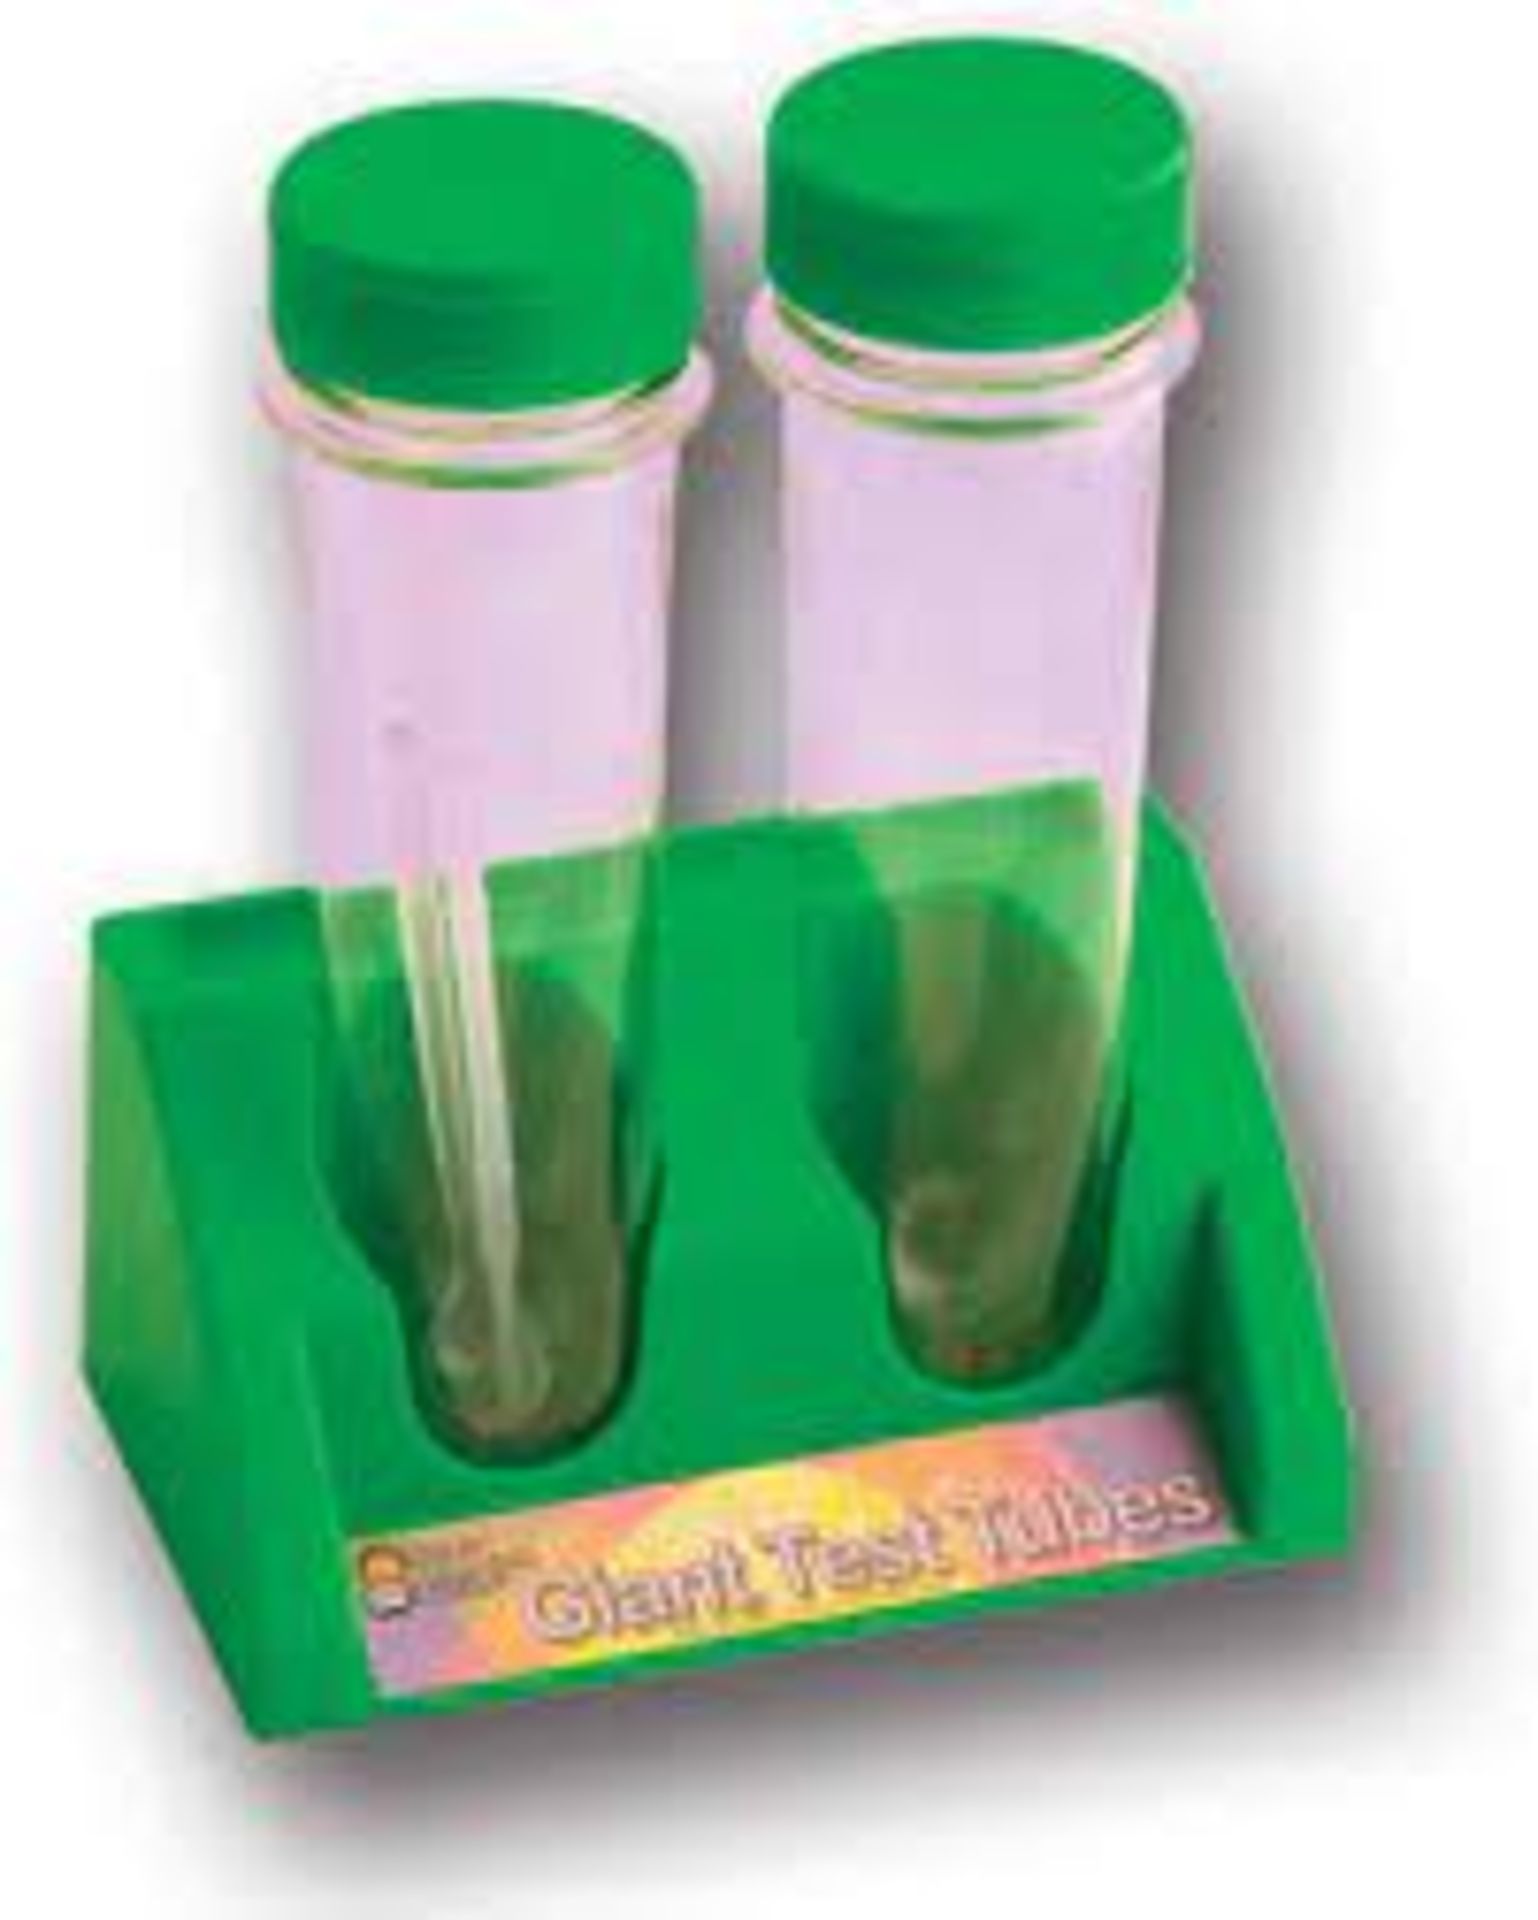 + VAT Grade A Small Scientists Giant Test Tubes With Caps & Matching Stand (Item is Blue not Green